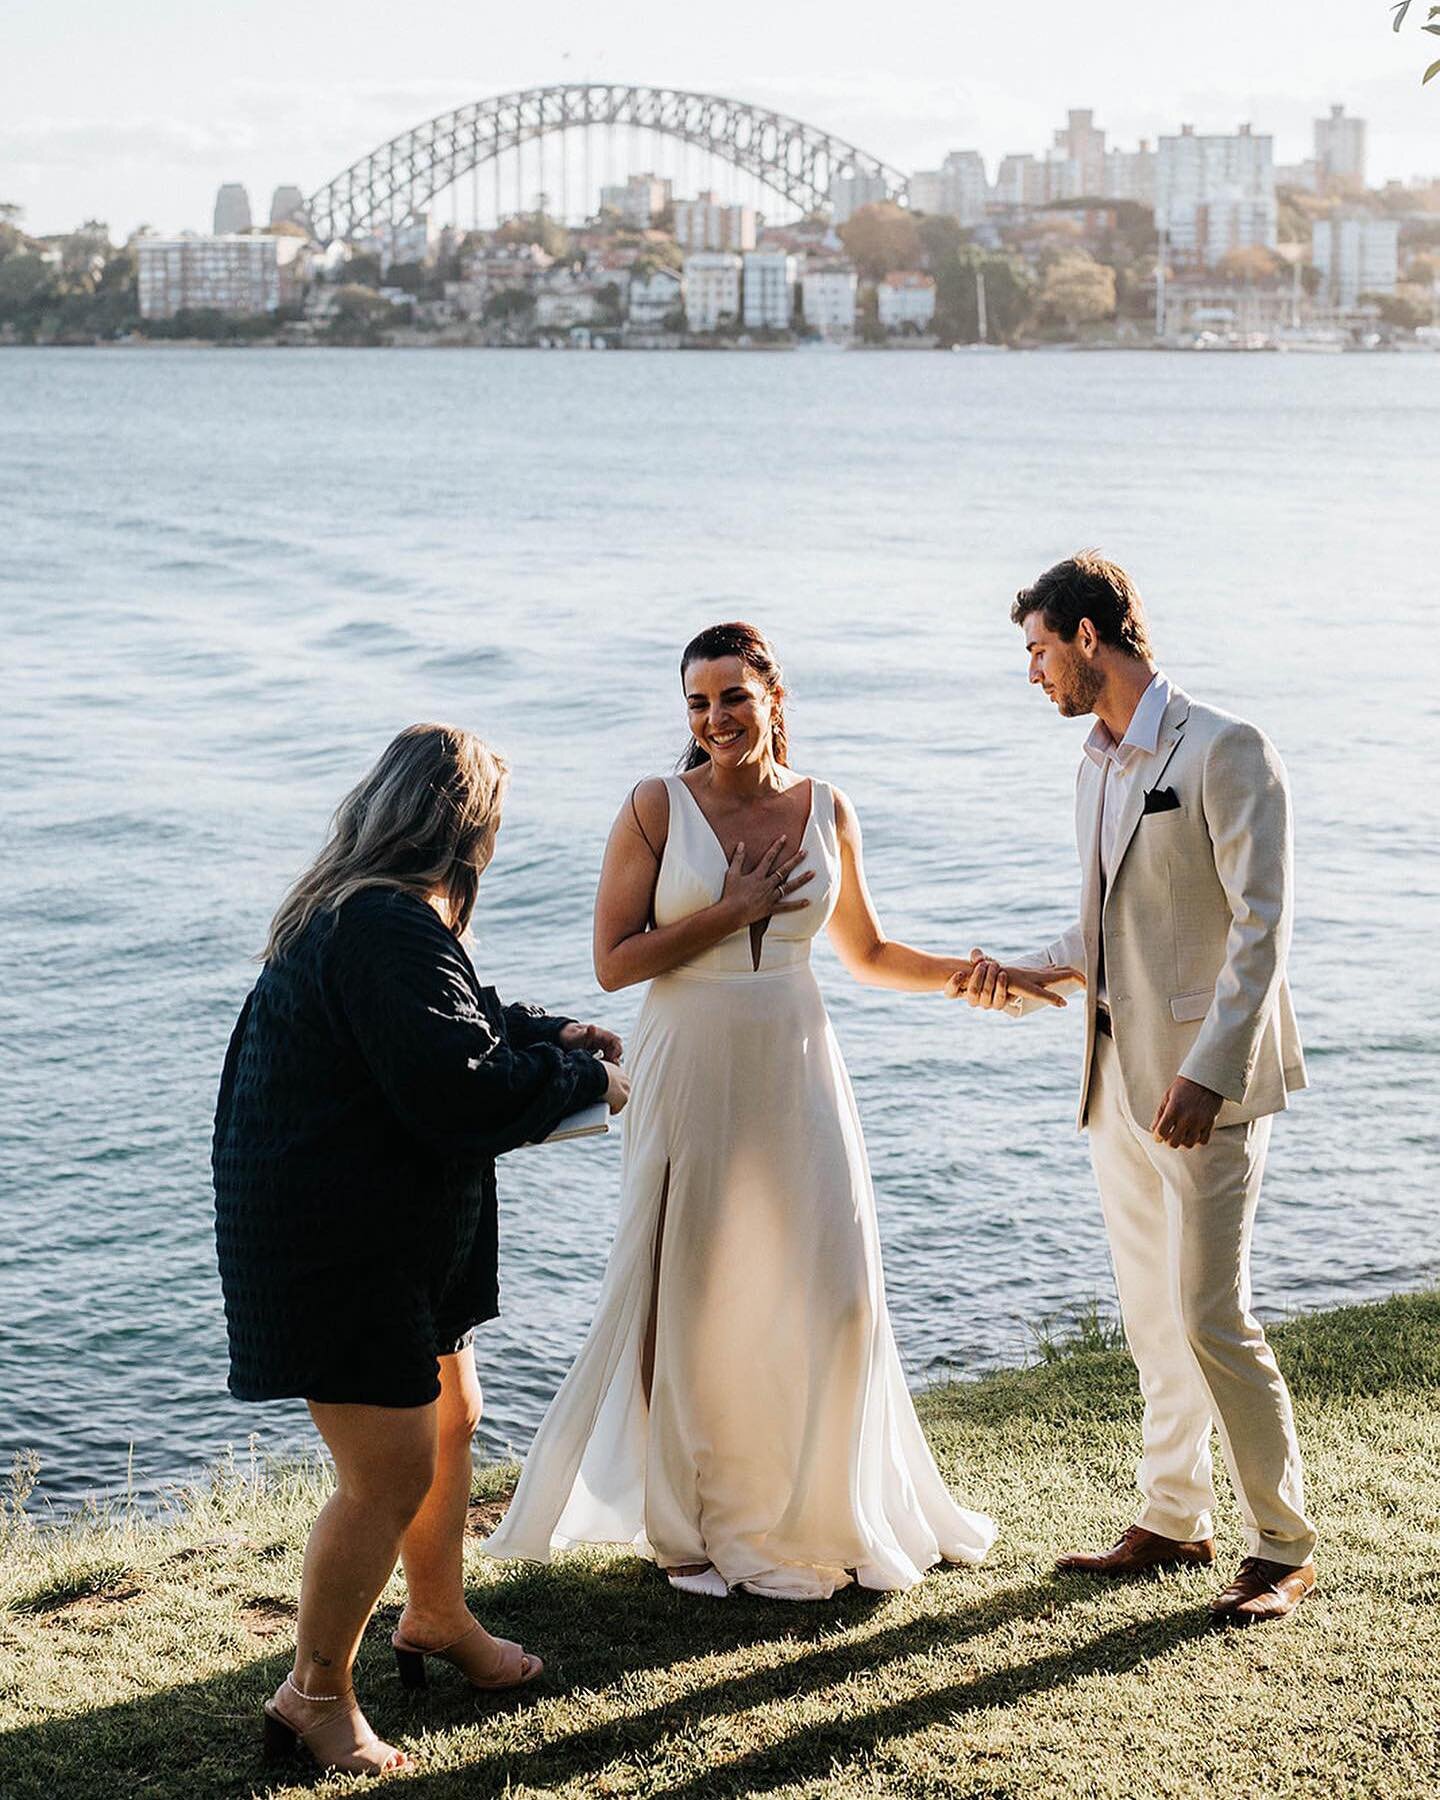 WHAT A VIEW, WHAT A COUPLE, WHAT A MOMENT✨

Throwing it back to April when I had the absolute pleasure of marrying Matt &amp; Jess in the most beautiful and intimate ceremony😍 

That backdrop&hellip; breathtaking.
Almost as breathtaking as this gorg